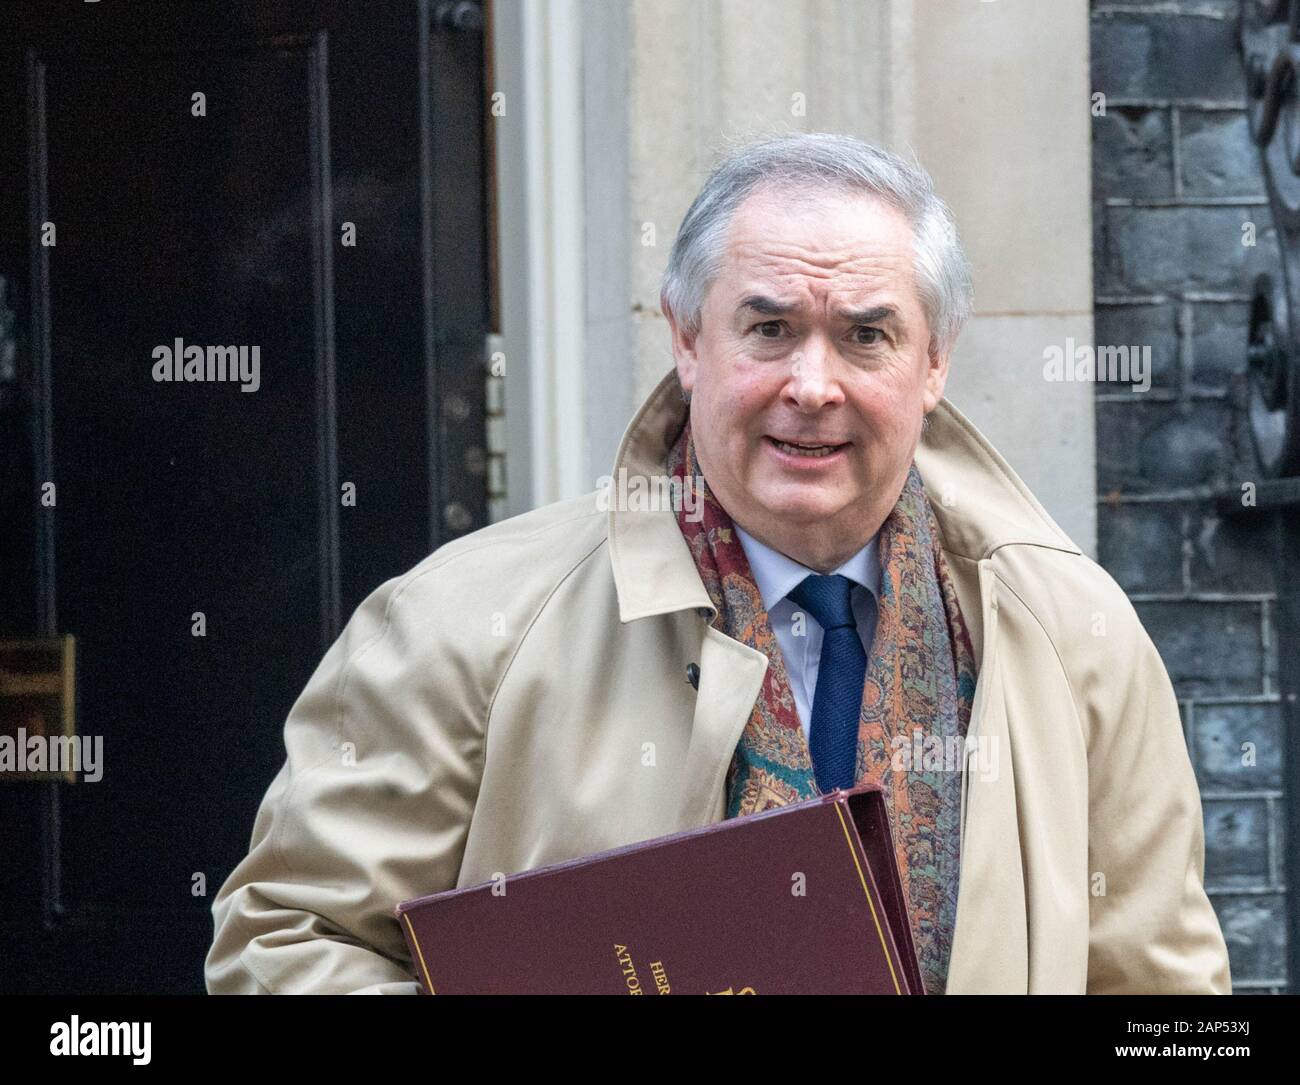 London, UK. 21st Jan, 2020. Geoffrey Cox MP PC Attorney General leaves a Cabinet meeting at 10 Downing Street, London Credit: Ian Davidson/Alamy Live News Stock Photo